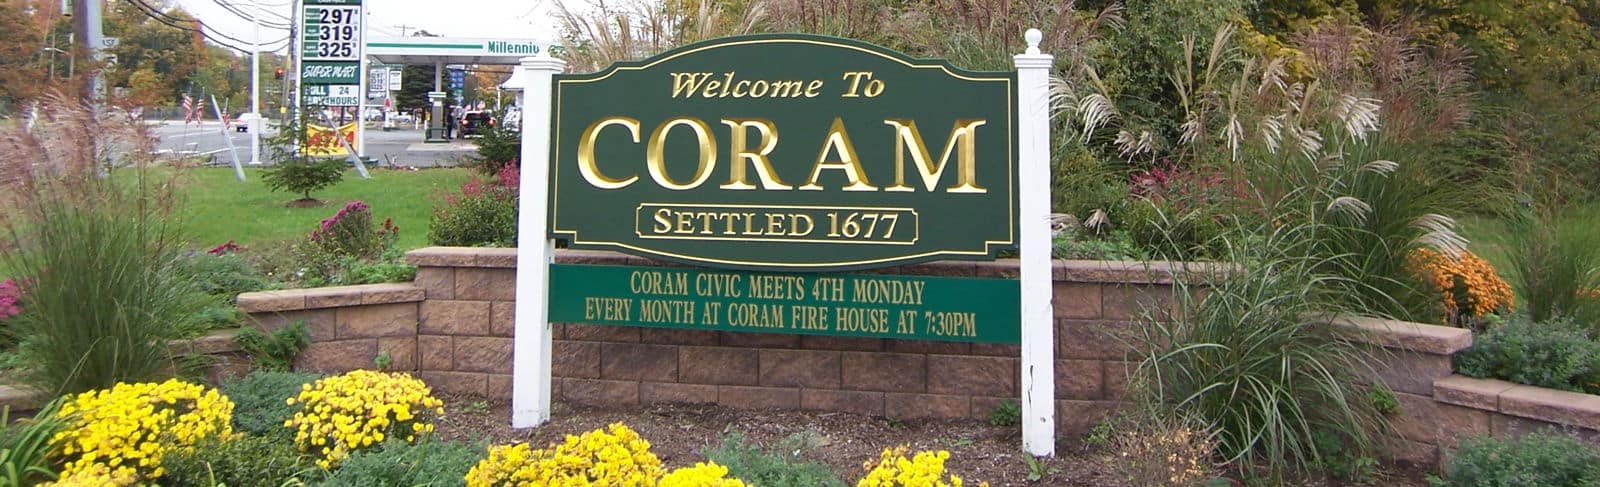 Welcome sign for Coram, NY by Premiess